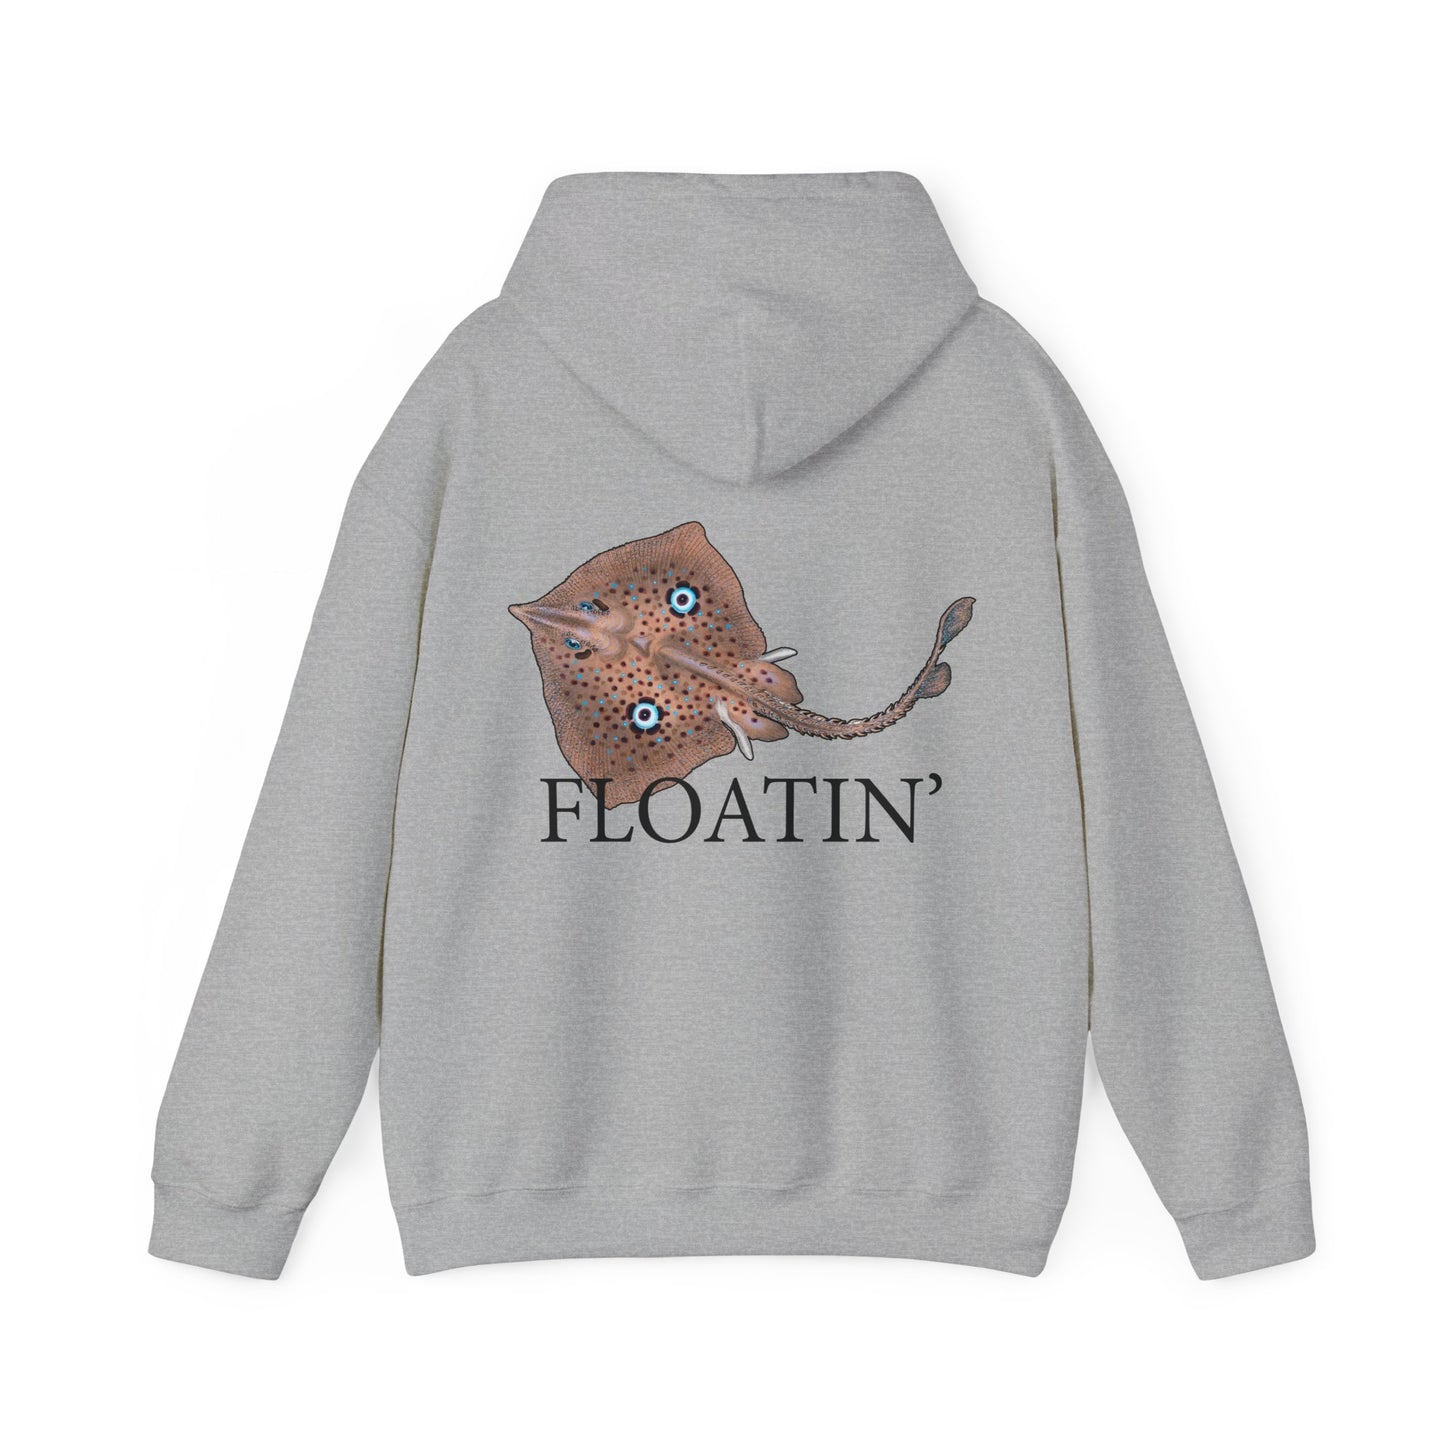 Floatin' - Hooded Edition